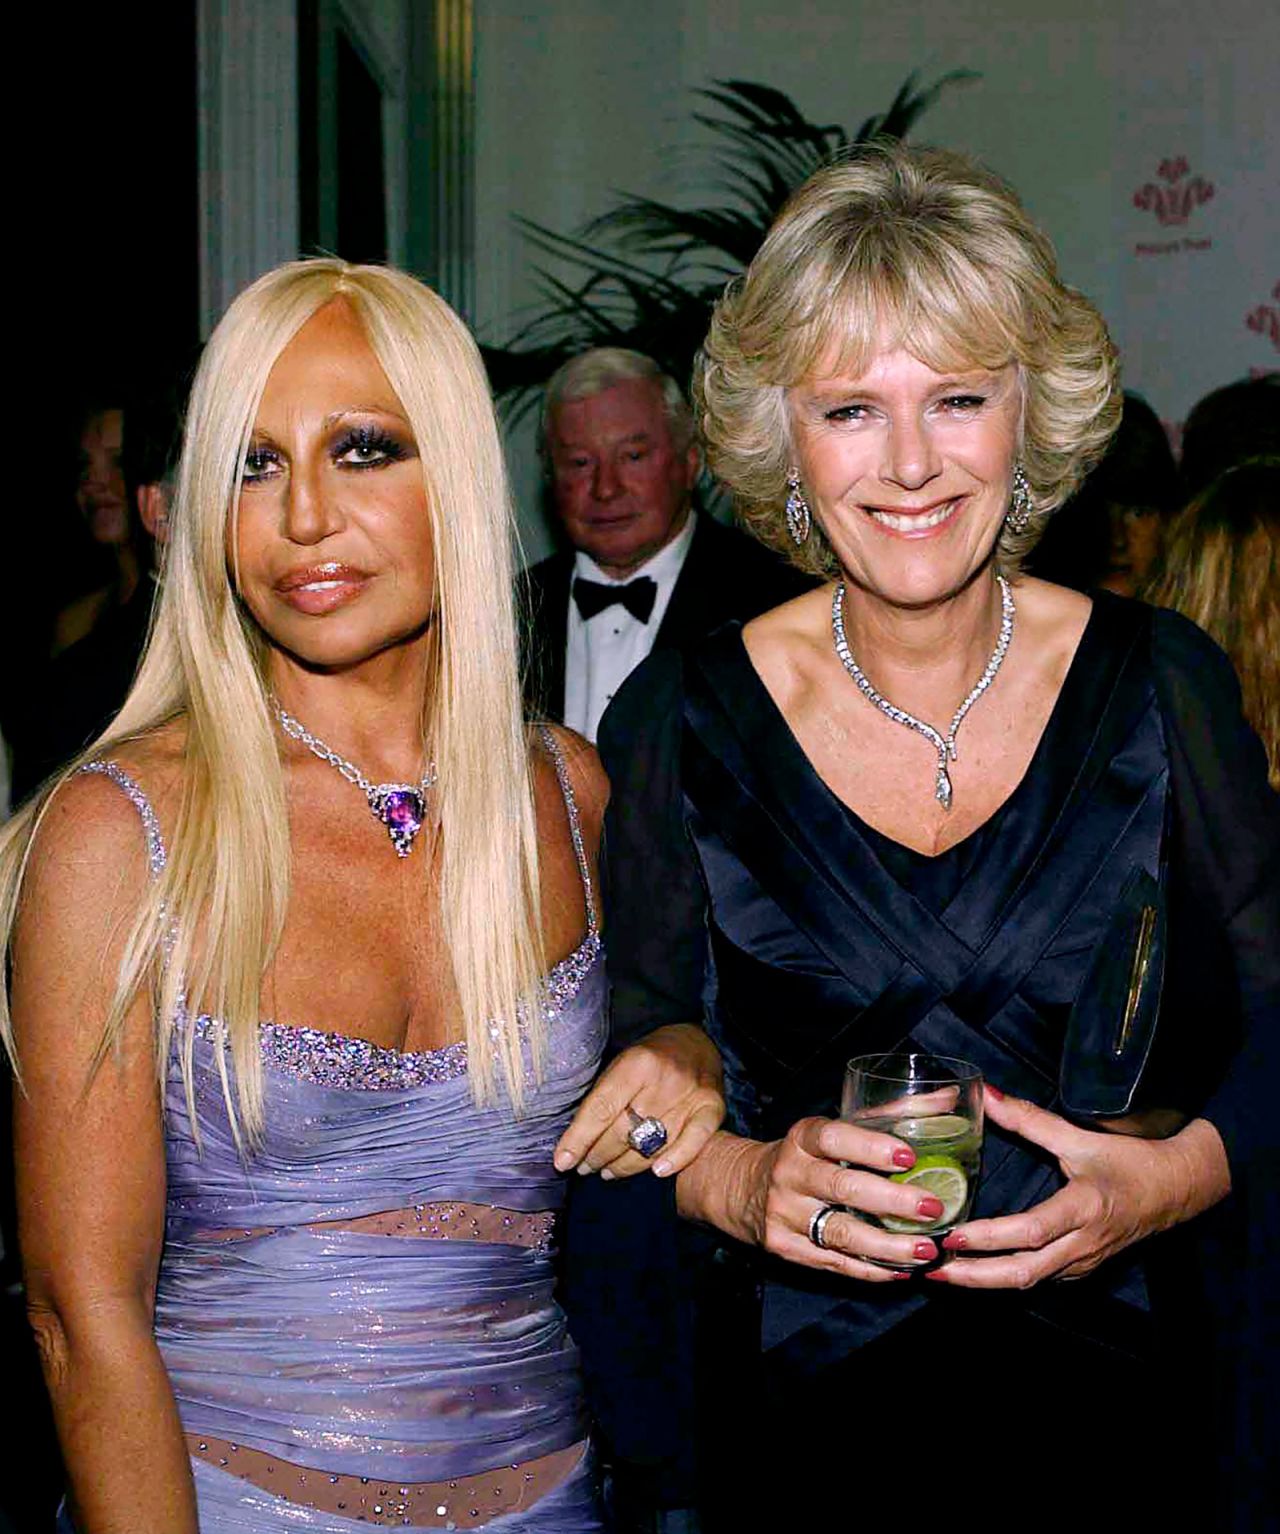 In 2003, while attending yet another fashion event (this time, the Prince's Trust 